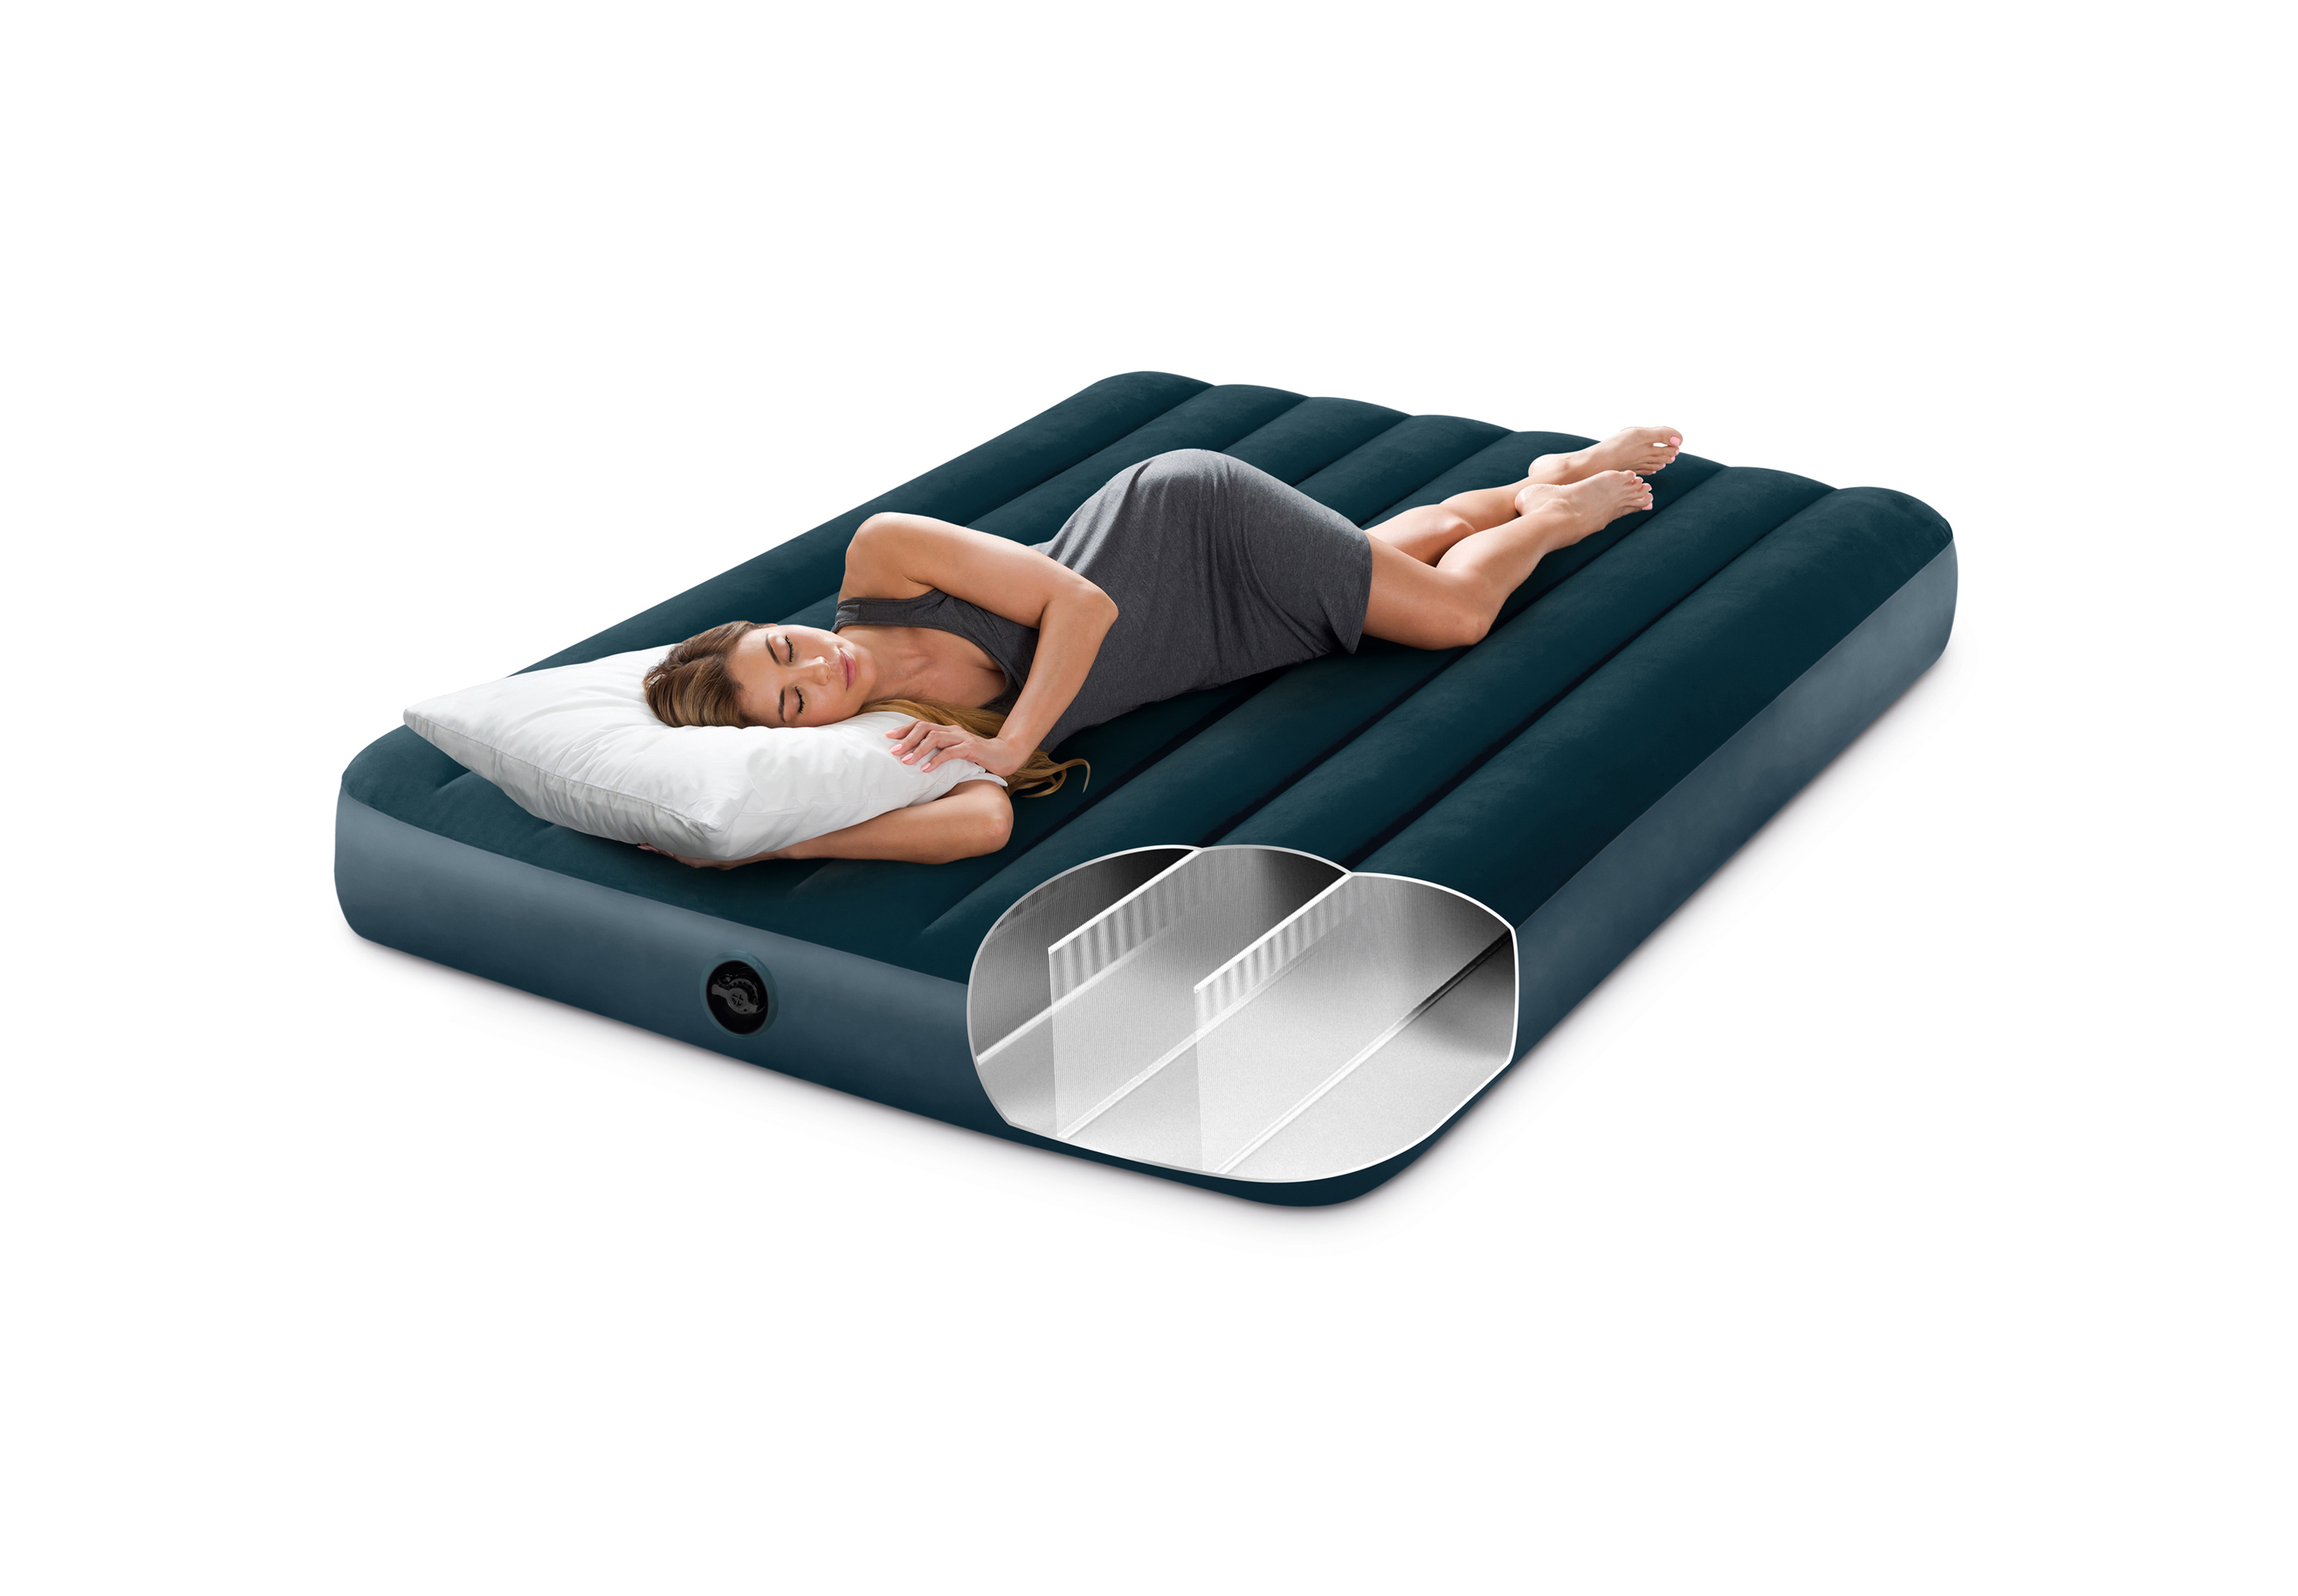 Intex 10" Standard Dura-Beam Airbed Mattress - Pump Not Included - FULL - image 3 of 10